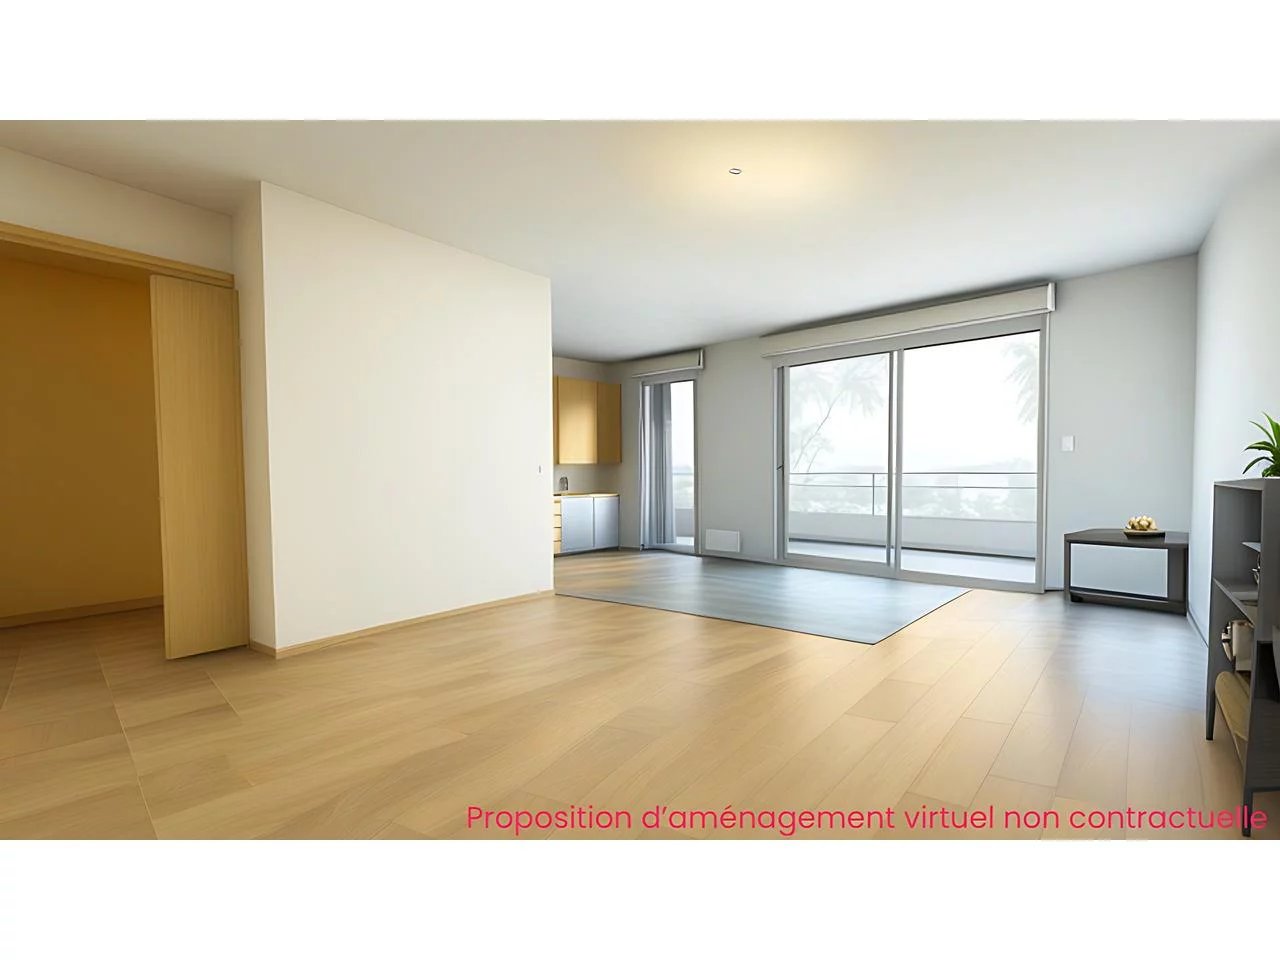 Appartement  3 Rooms 70m2  for sale   395 000 €